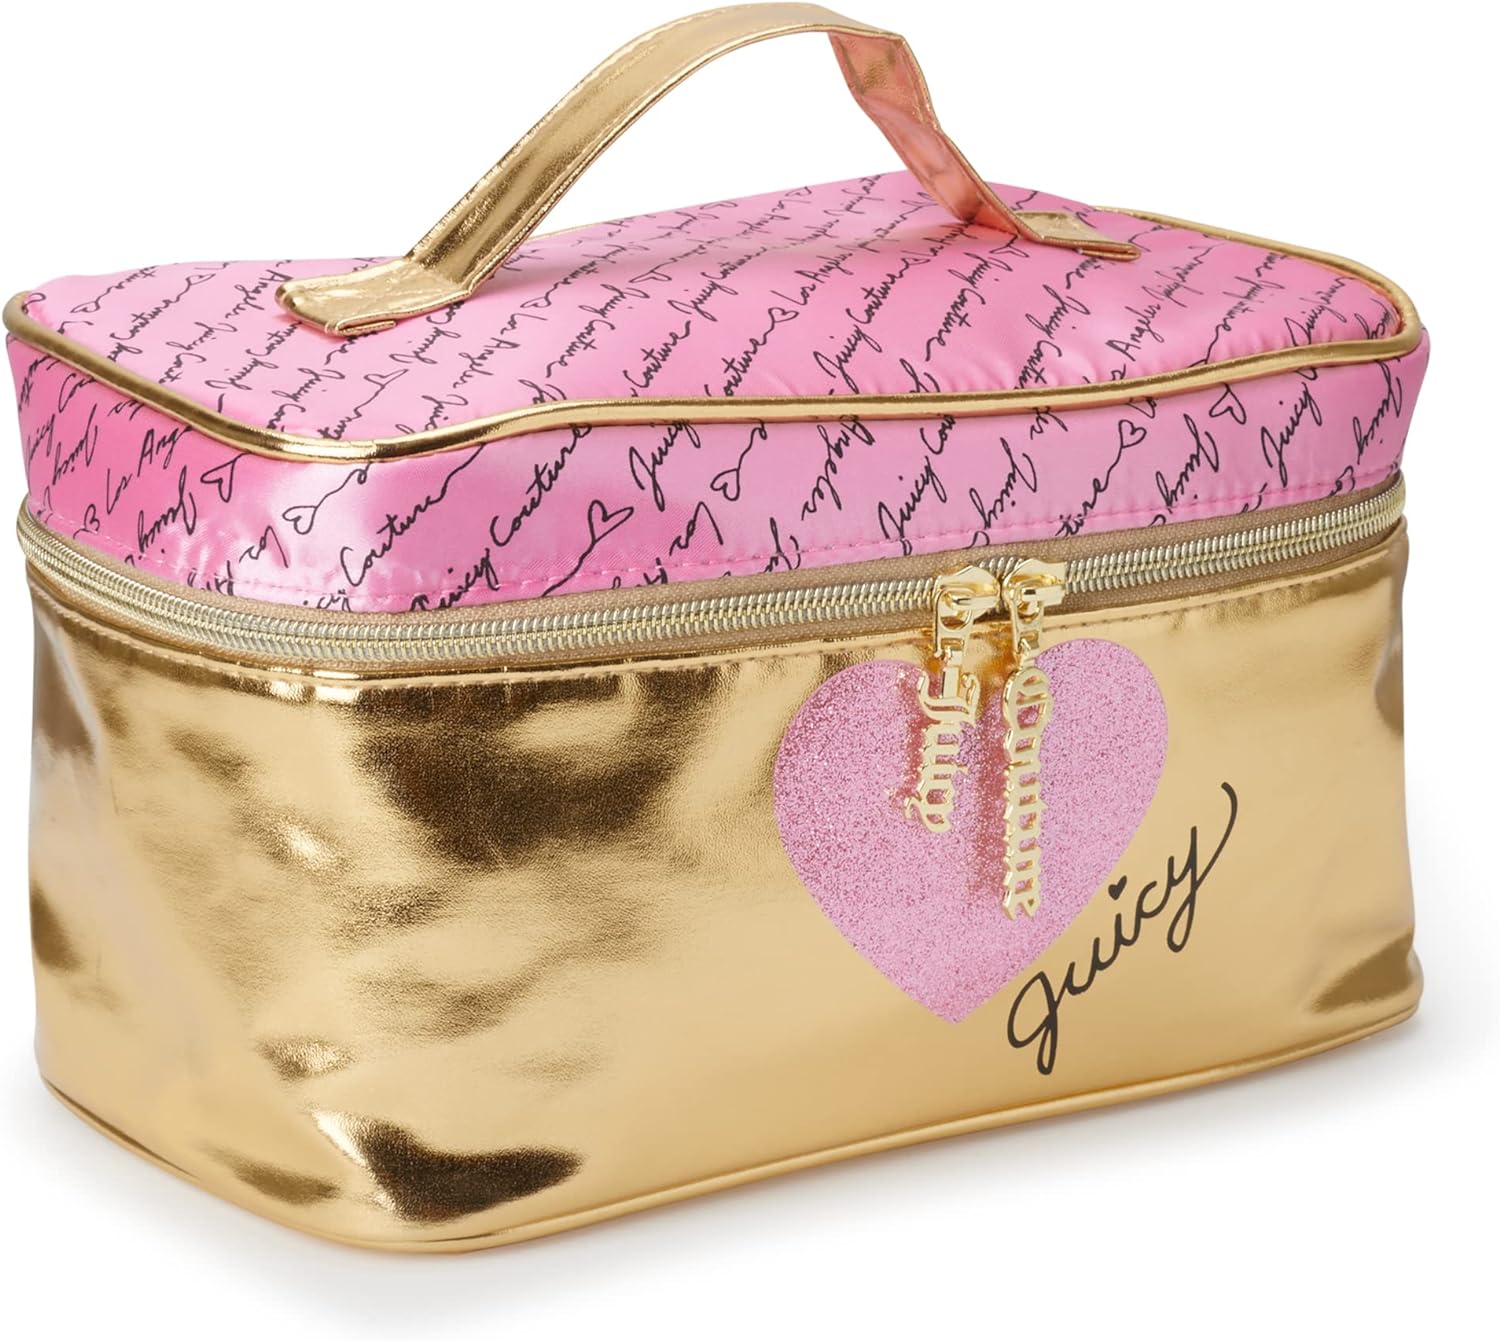 Juicy Couture Women's Cosmetics Bag - Travel Makeup and Toiletries Tra –  Aroma Pier Inc